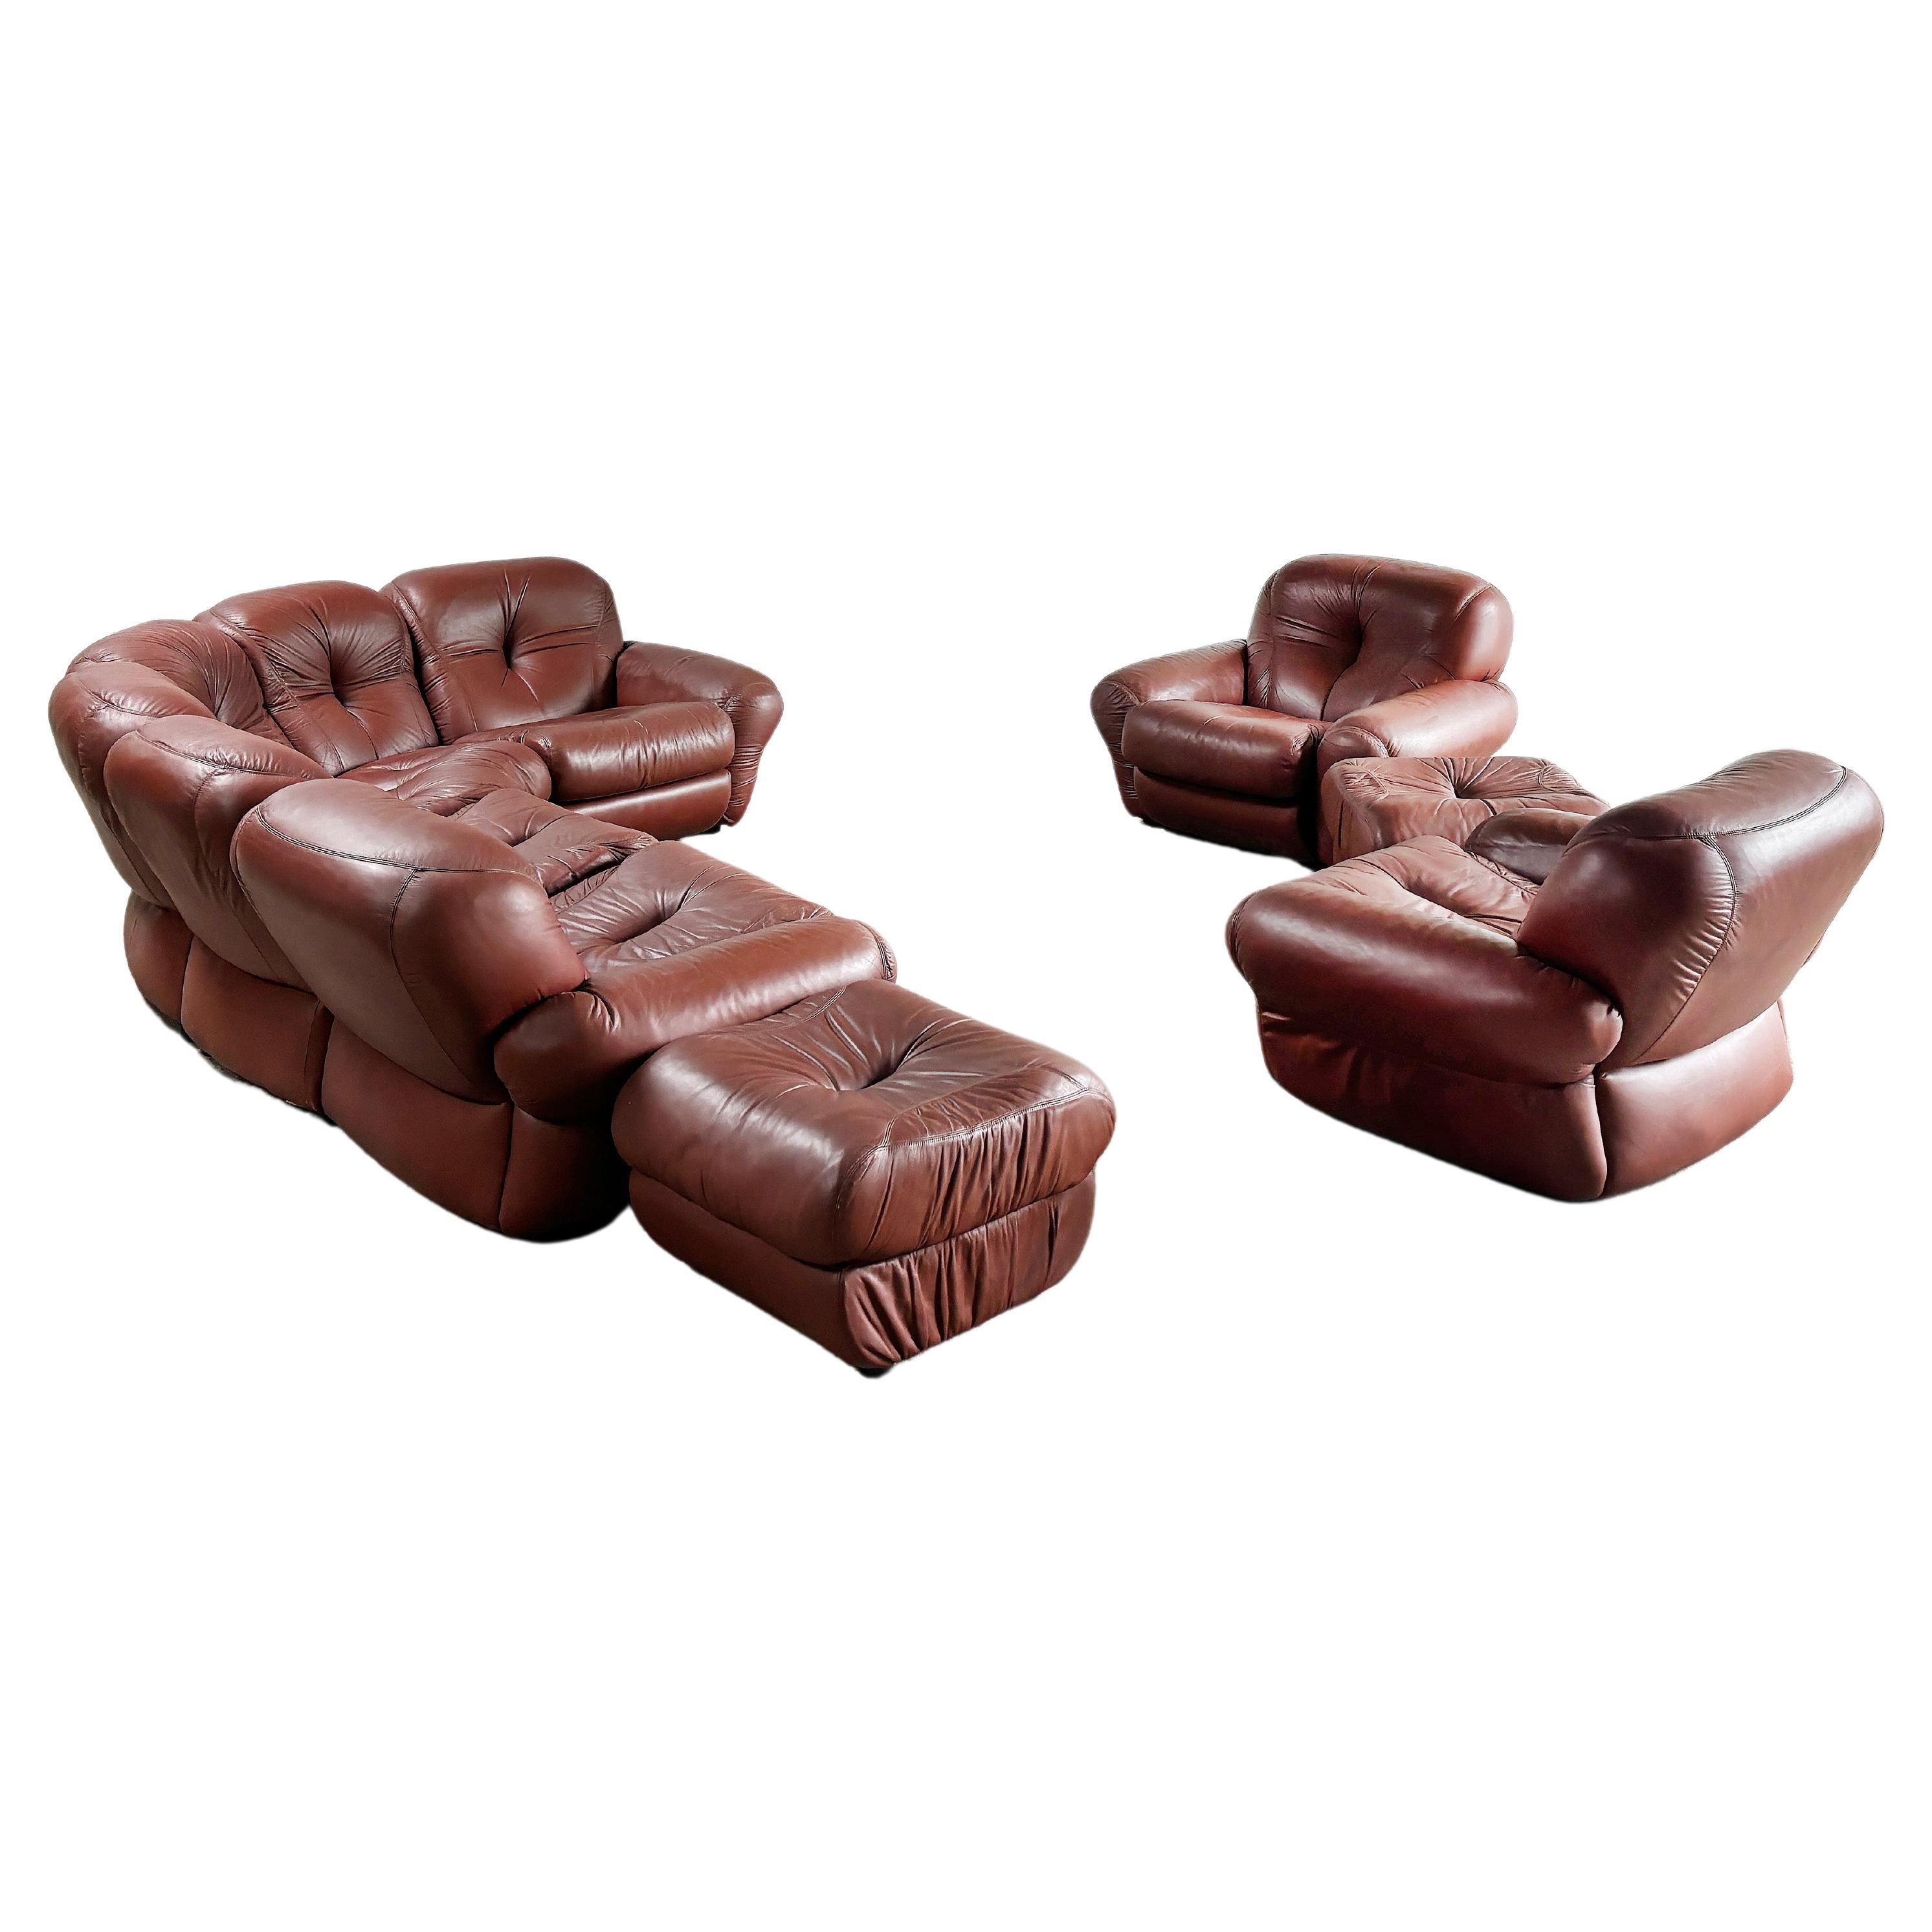 Italian Modular Sofa Set In Cognac Leather Attributed To Mobil Girgi, 1970's For Sale